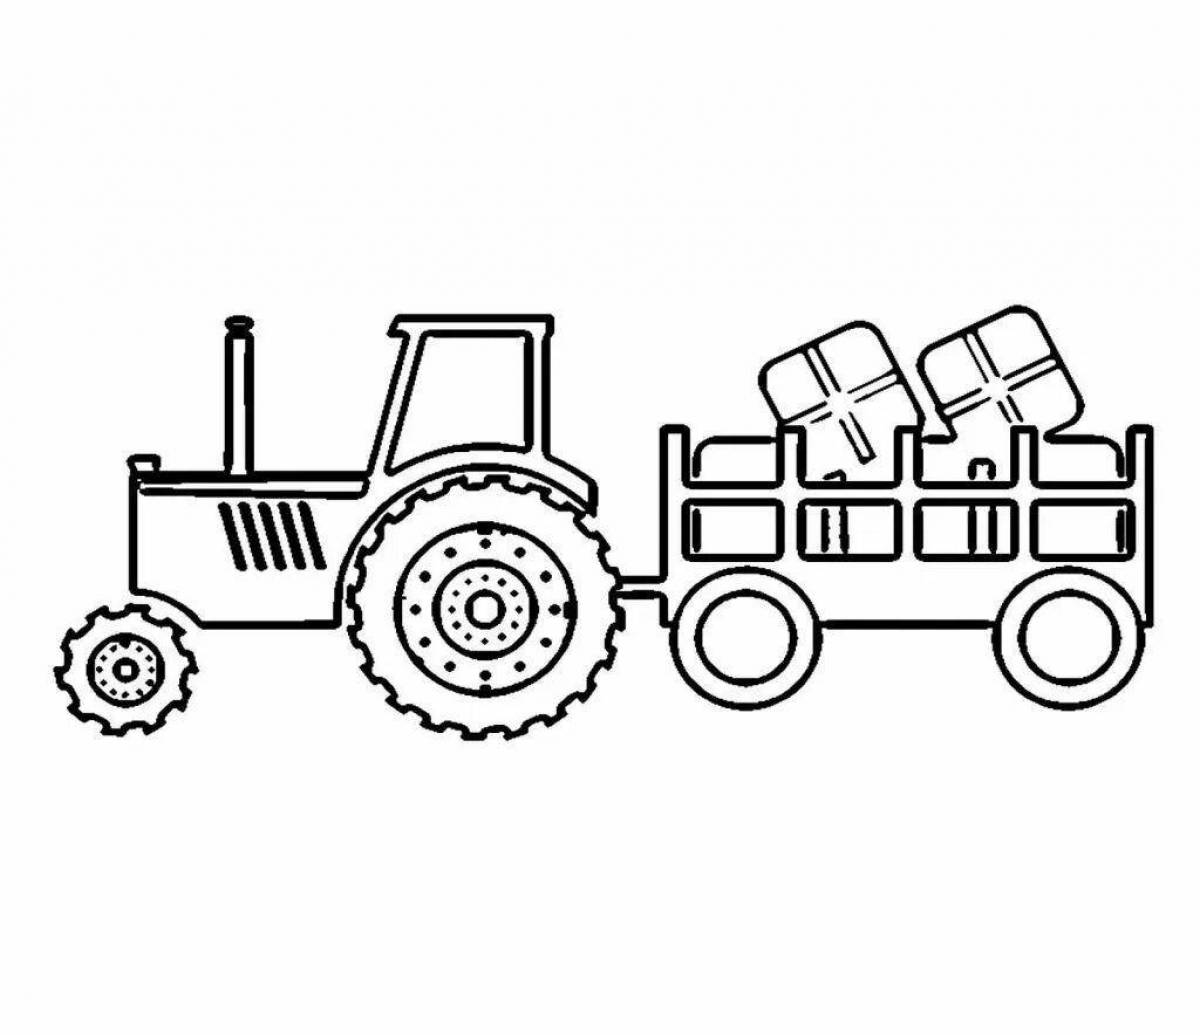 Innovative tractor with trailer coloring page